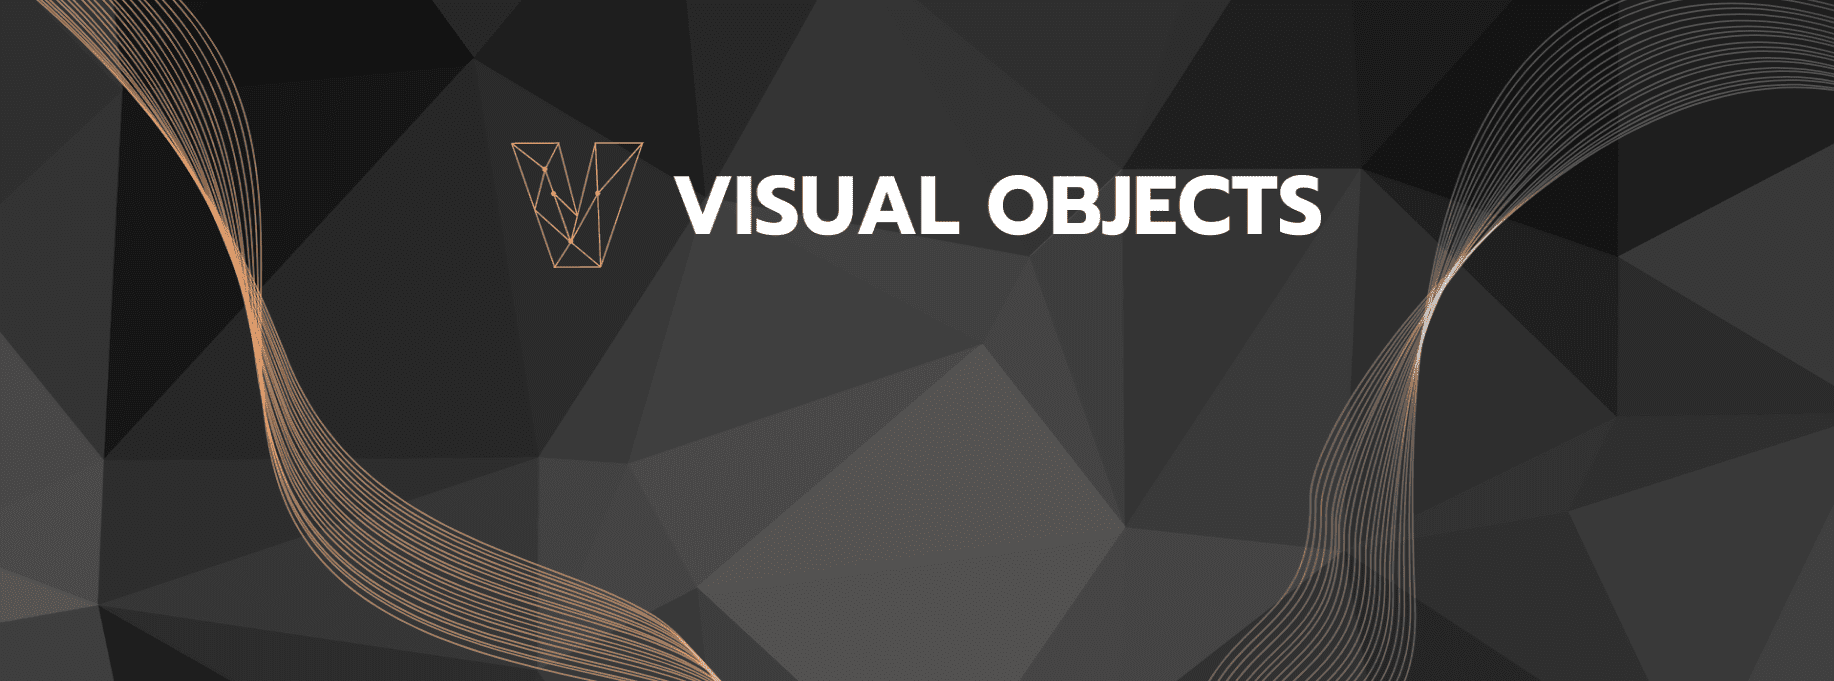 Softkit is named among the best Data Analytics companies in the annual Visual Objects list